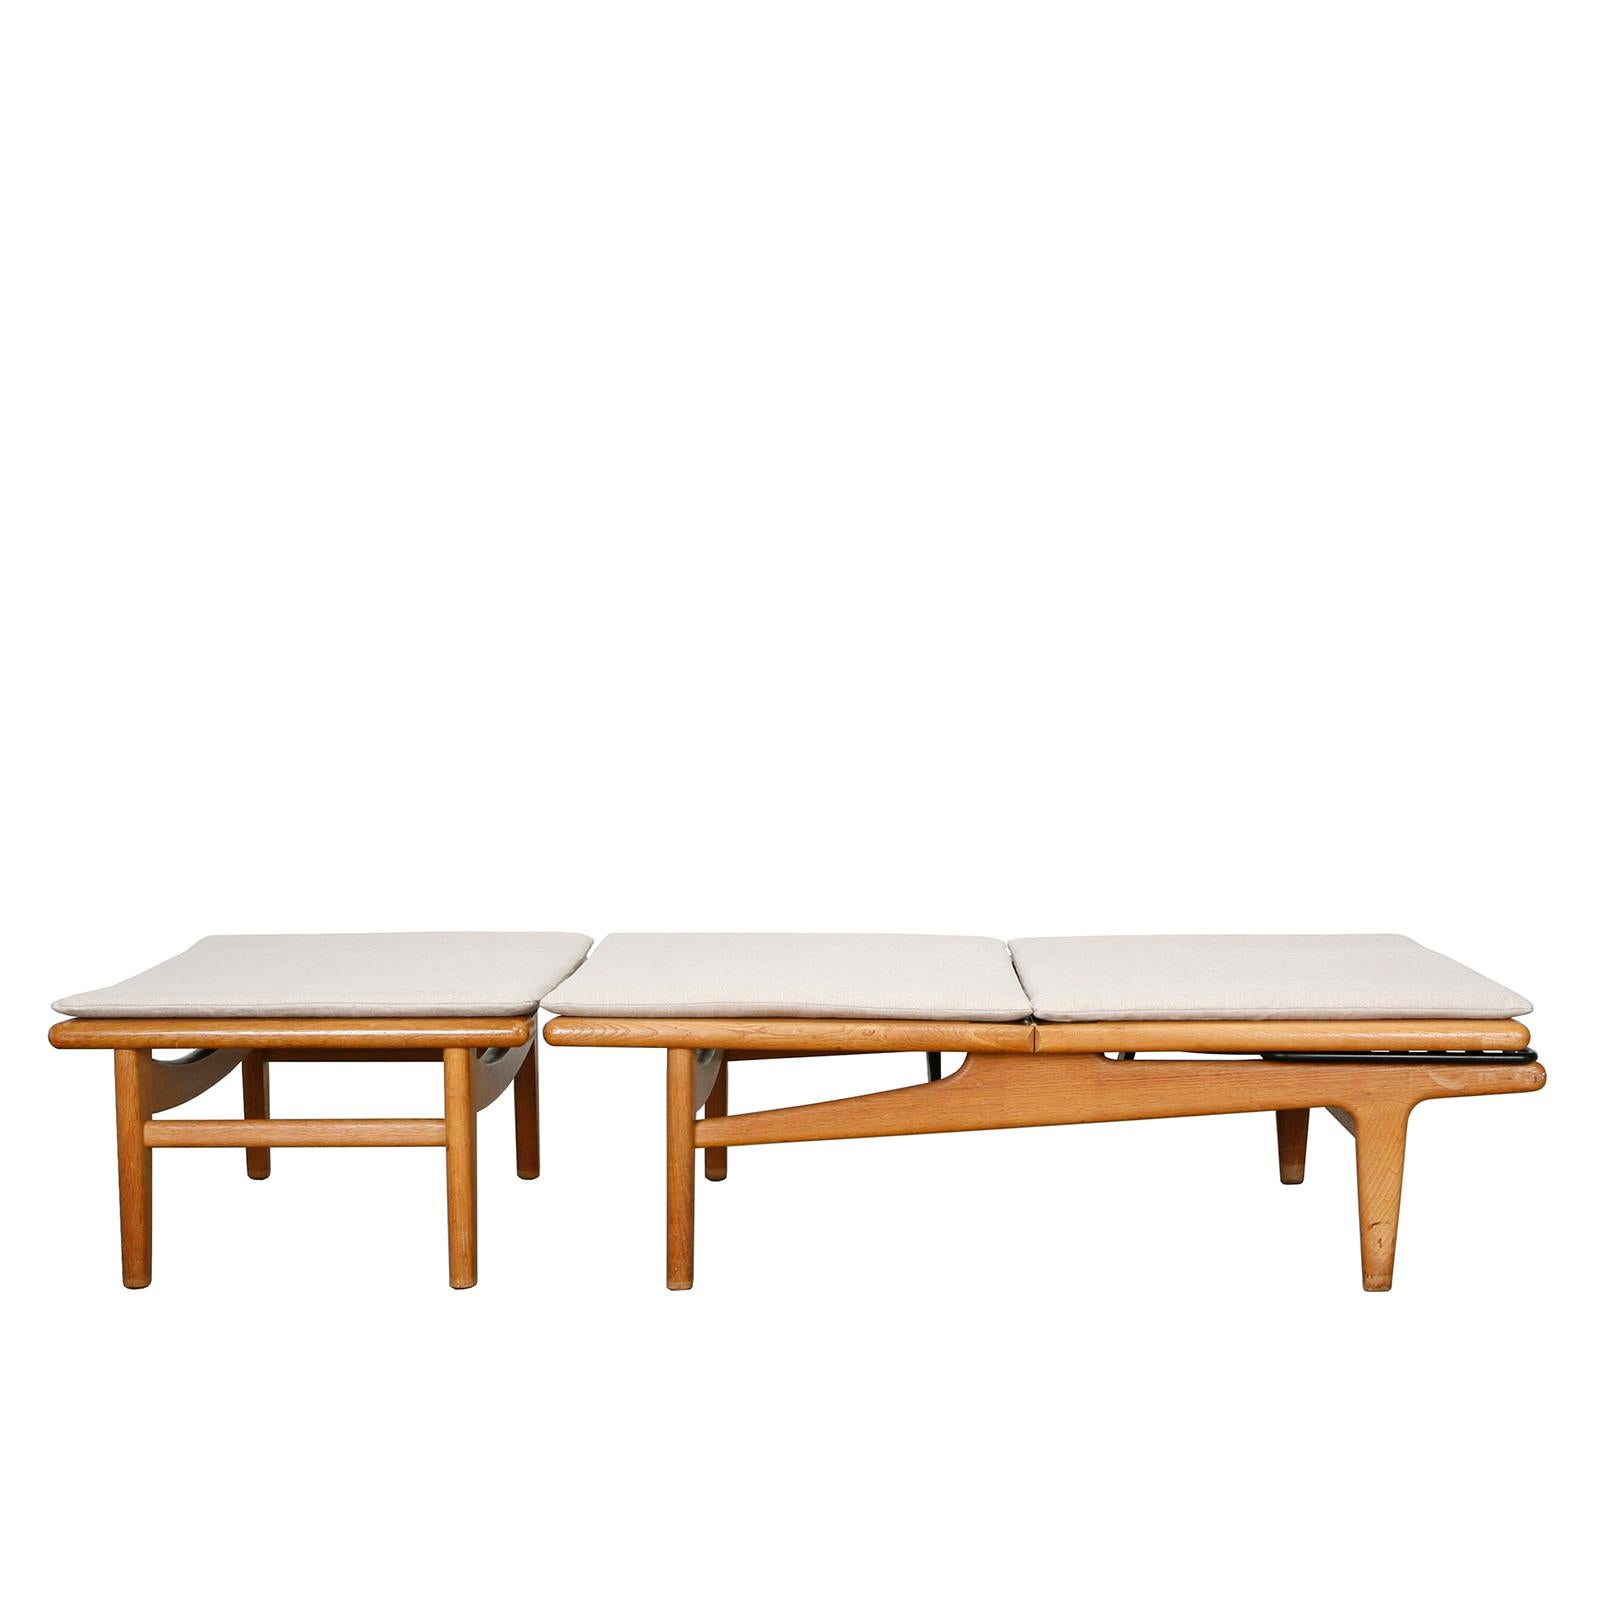 A daybed in two sections made of solid oak with metal fixtures and cushions in linen canvas.
Designed by Hans Wegner in 1955. Made by GETAMA, Denmark.